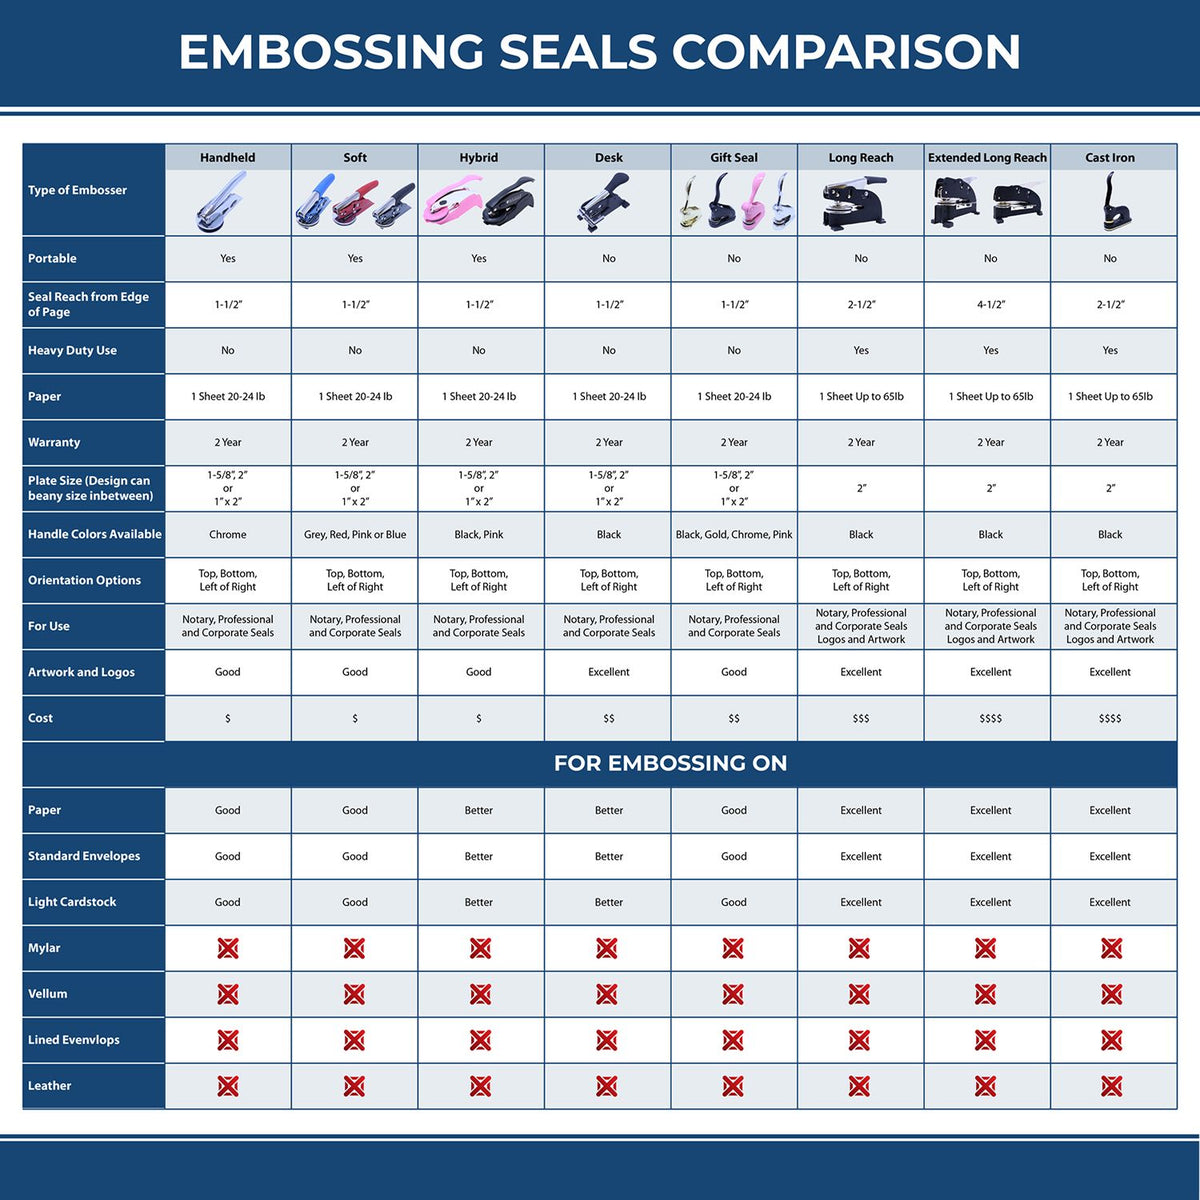 A comparison chart for the different types of mount models available for the Handheld Alaska Architect Seal Embosser.